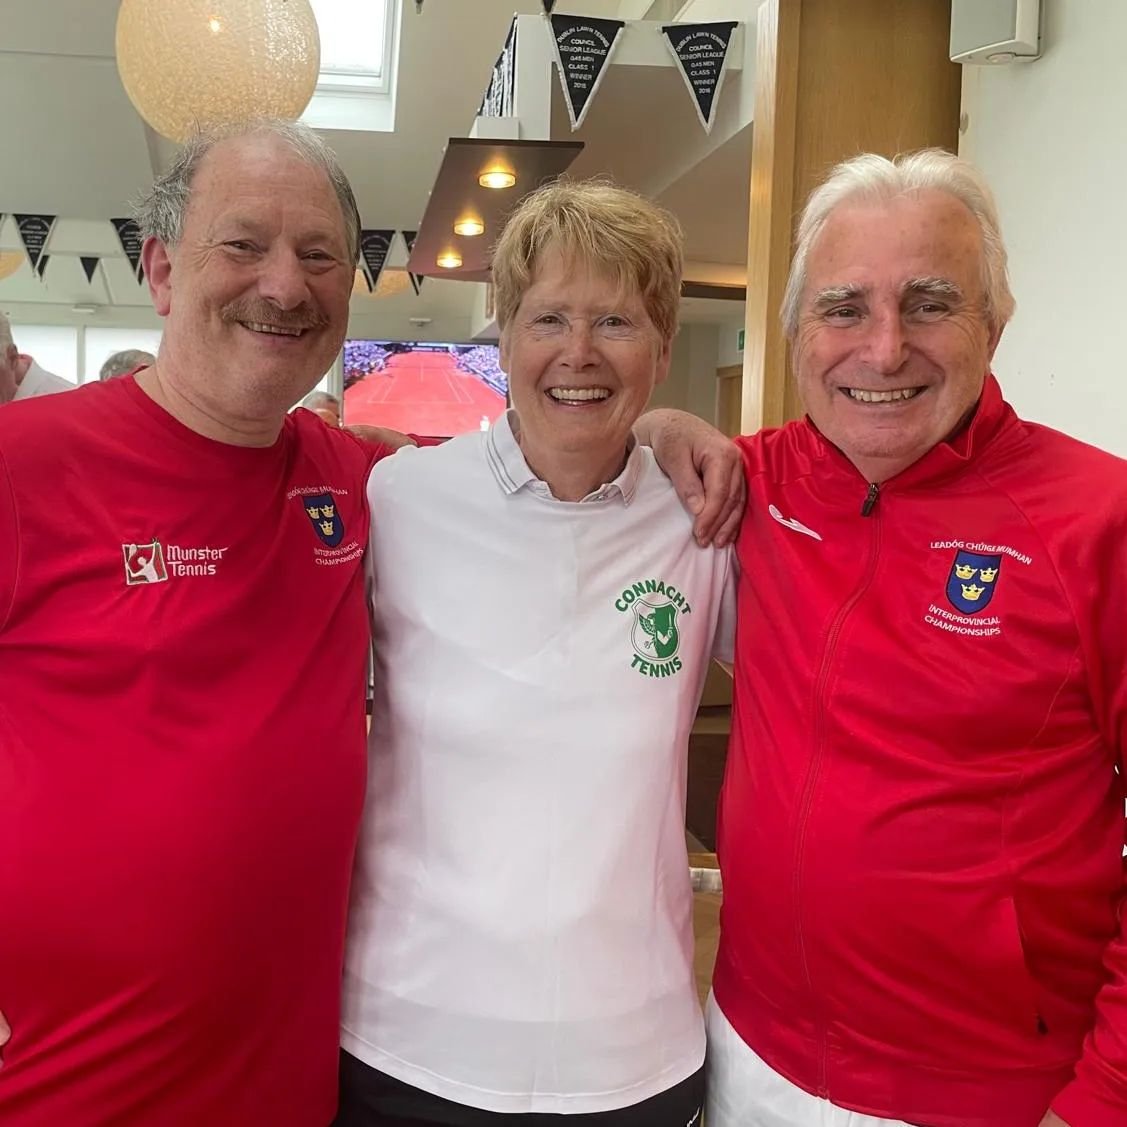 Well done to Eugene (Munster), Marie (Connaught), and Pat (Munster) who are all playing in the SuperSeniors Interprovincial Championships being held in Lansdowne LTC today @munster_tennis_official @connacht_tennis @lansdowneltc @leinstertennis